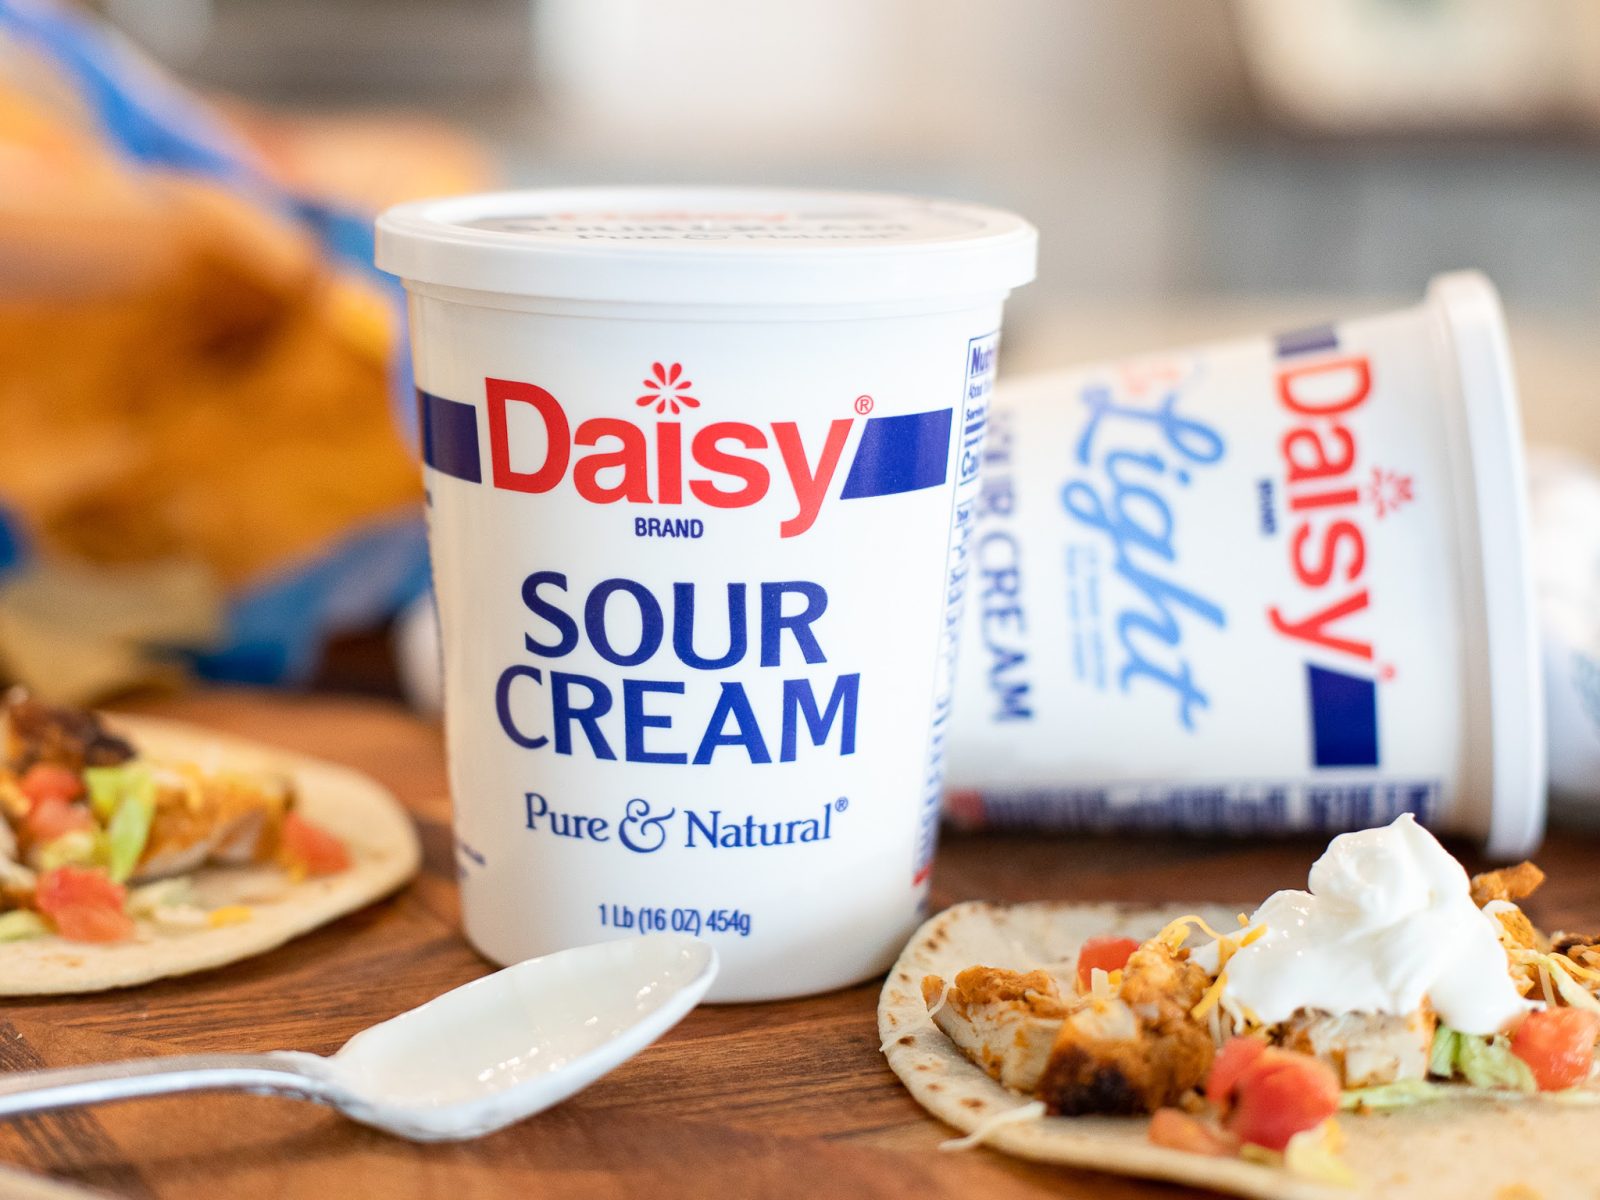 Get Daisy Cottage Cheese or Sour Cream For As Low As $1.99 At Kroger